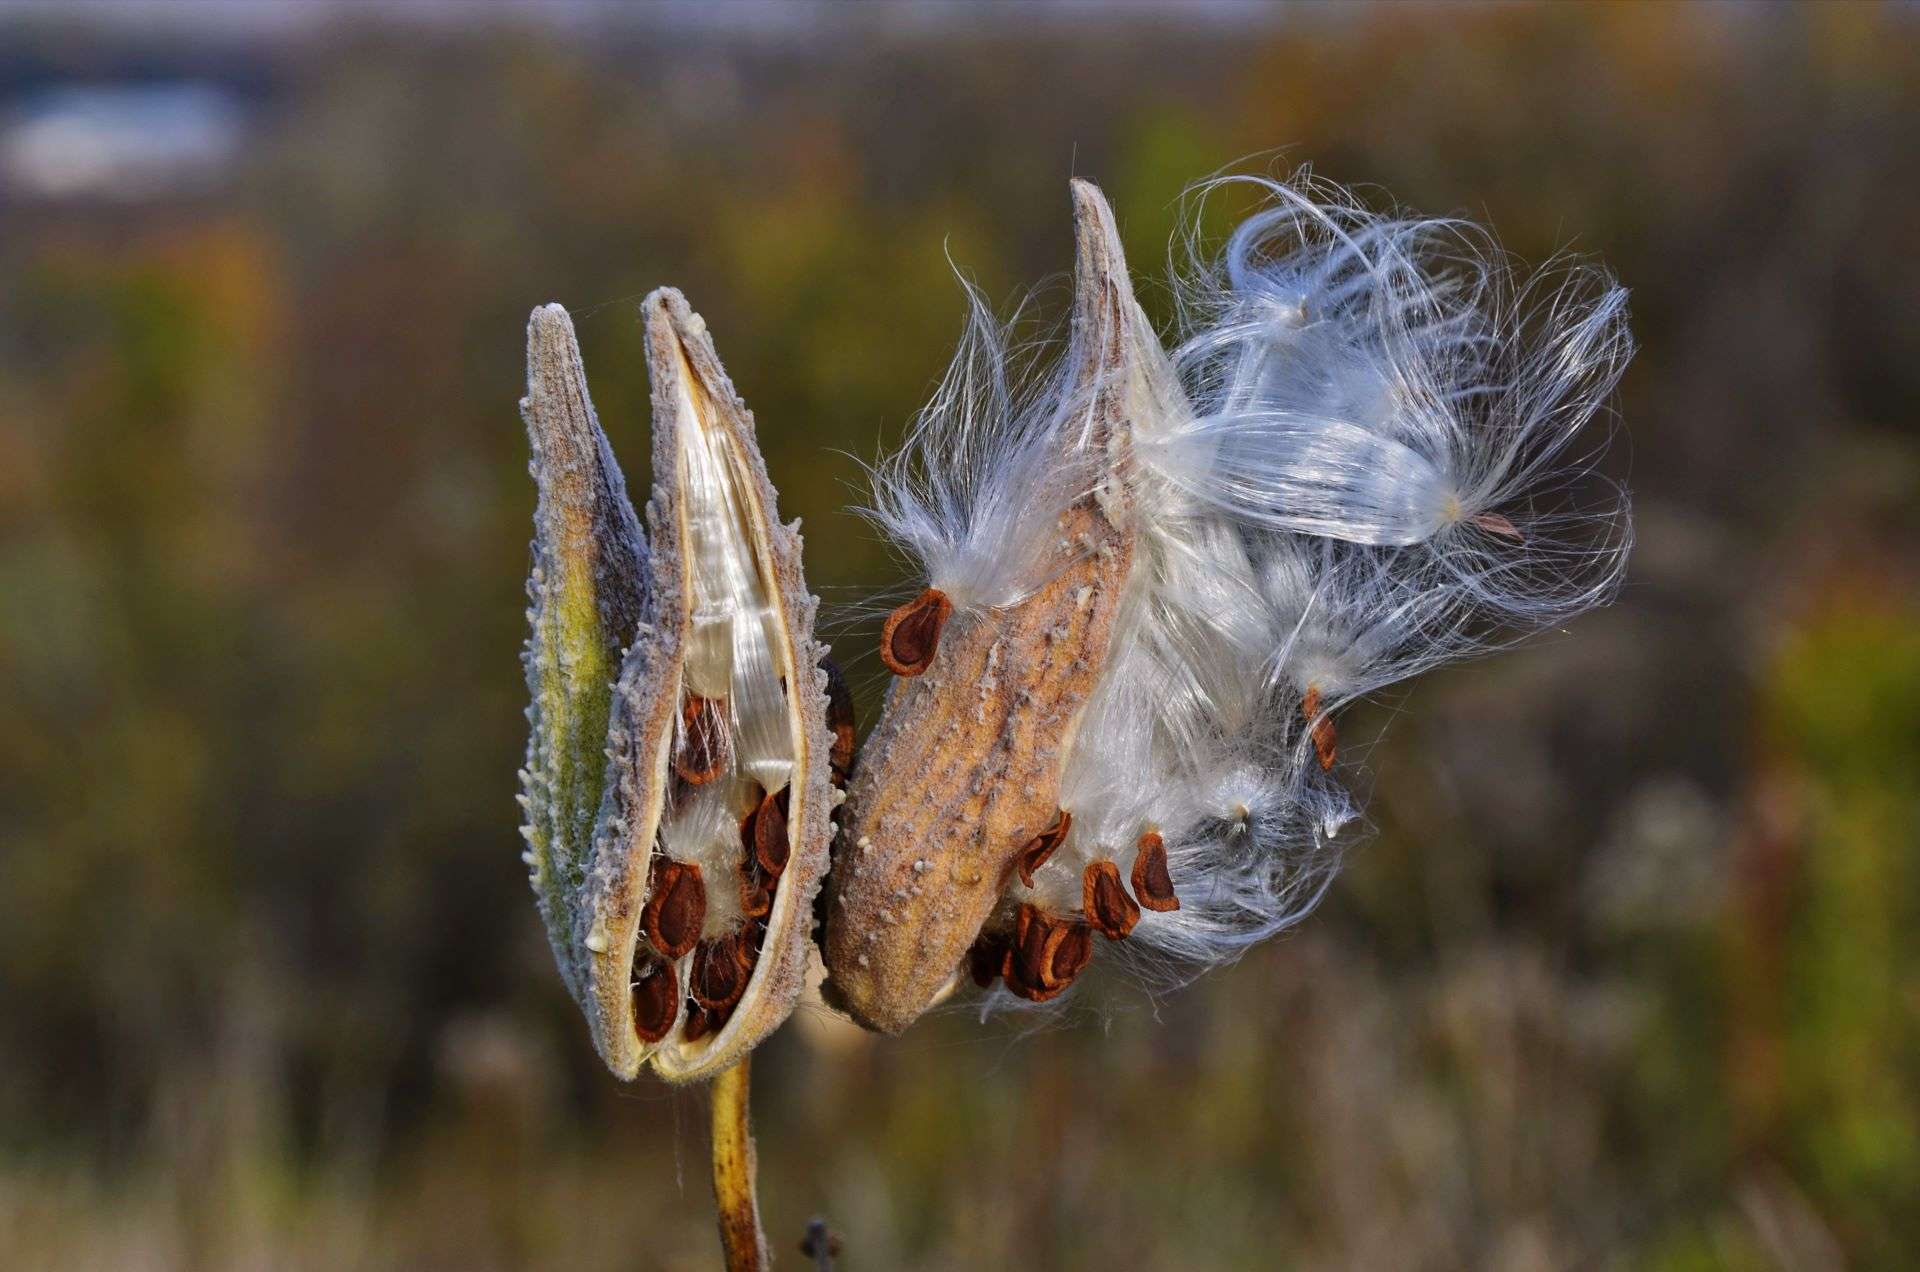 The milkweed (Asclepias siraca) splits seeds with white fluff at the end of maturation.